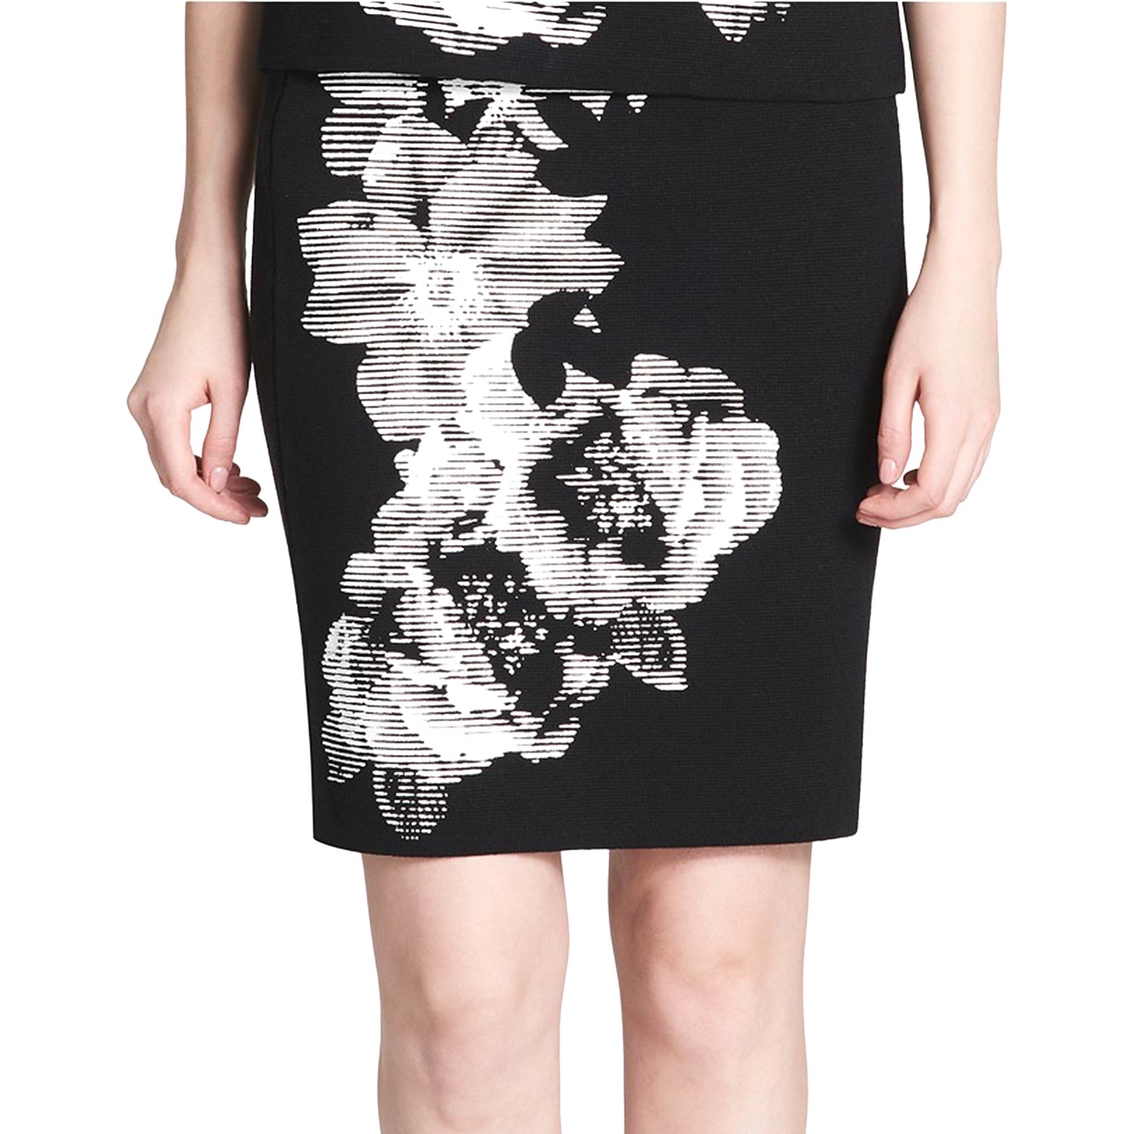 Farmacologie Storing zuur Calvin Klein Floral Graphic Sweater Skirt | Skirts | Clothing & Accessories  | Shop The Exchange